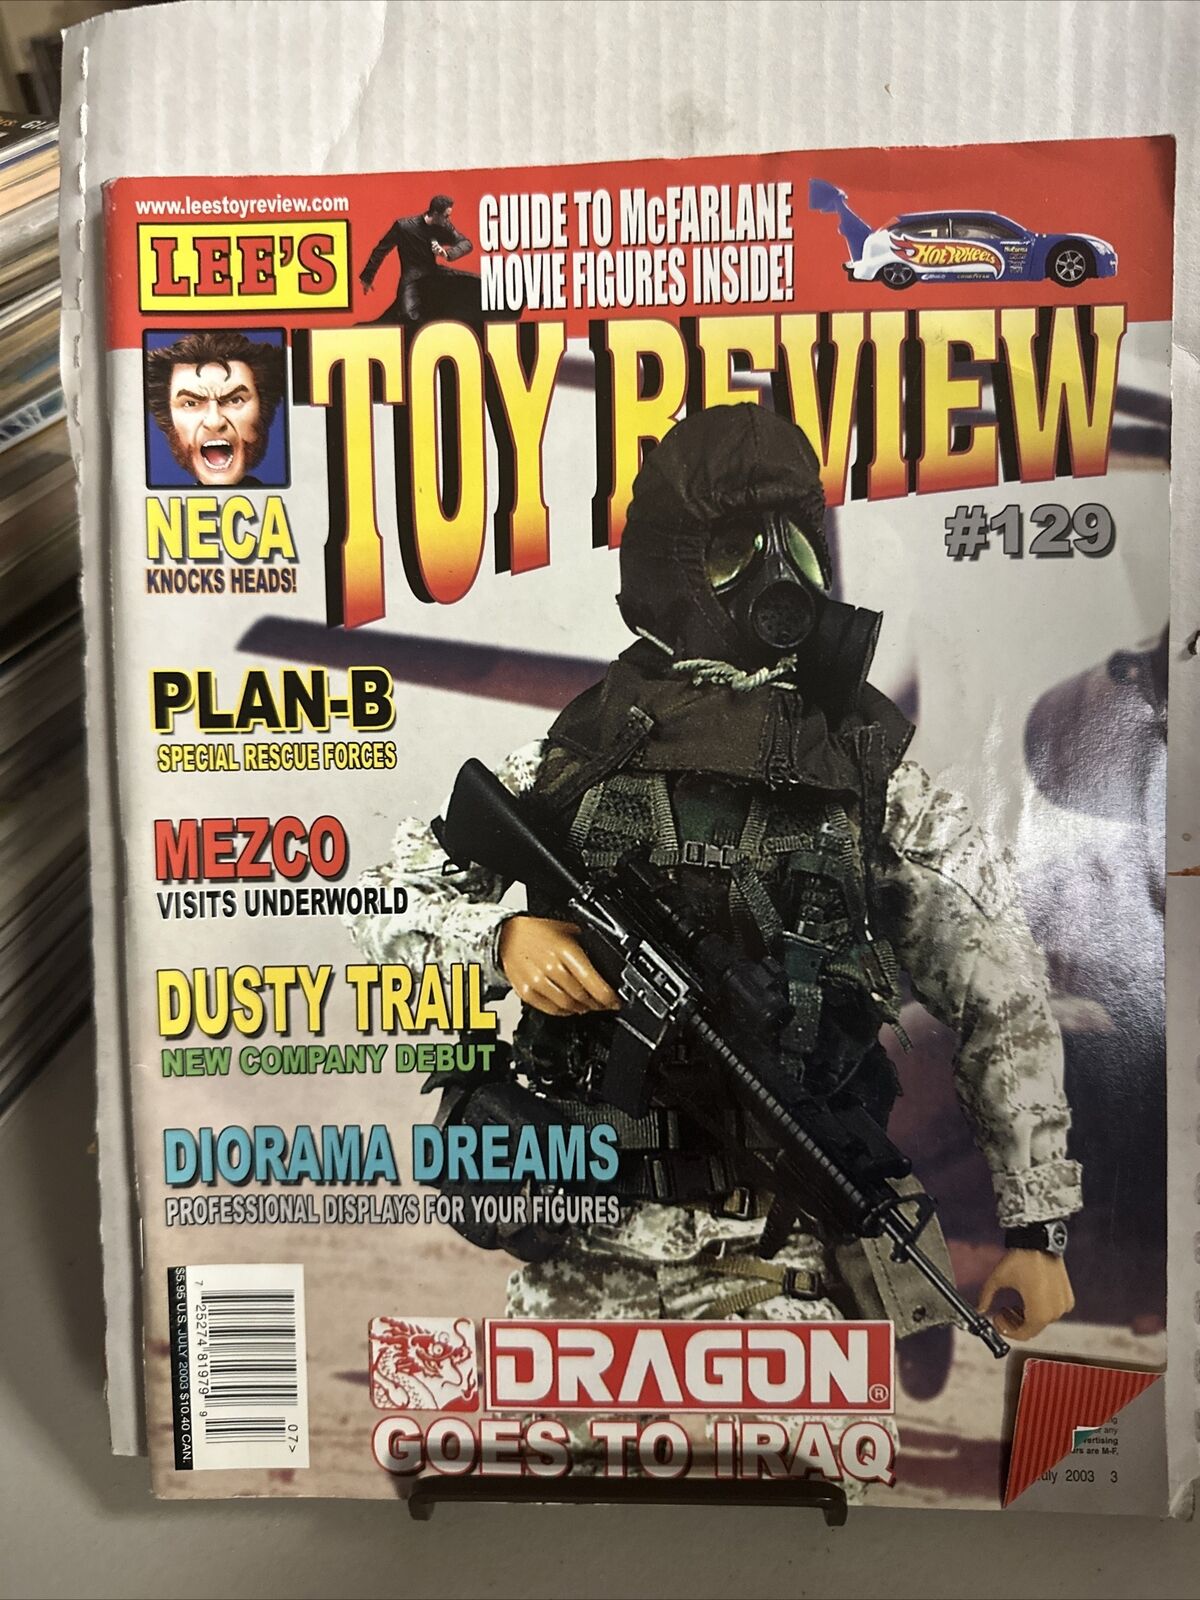 Lee\'s Toy Review Magazine #129 July 2003